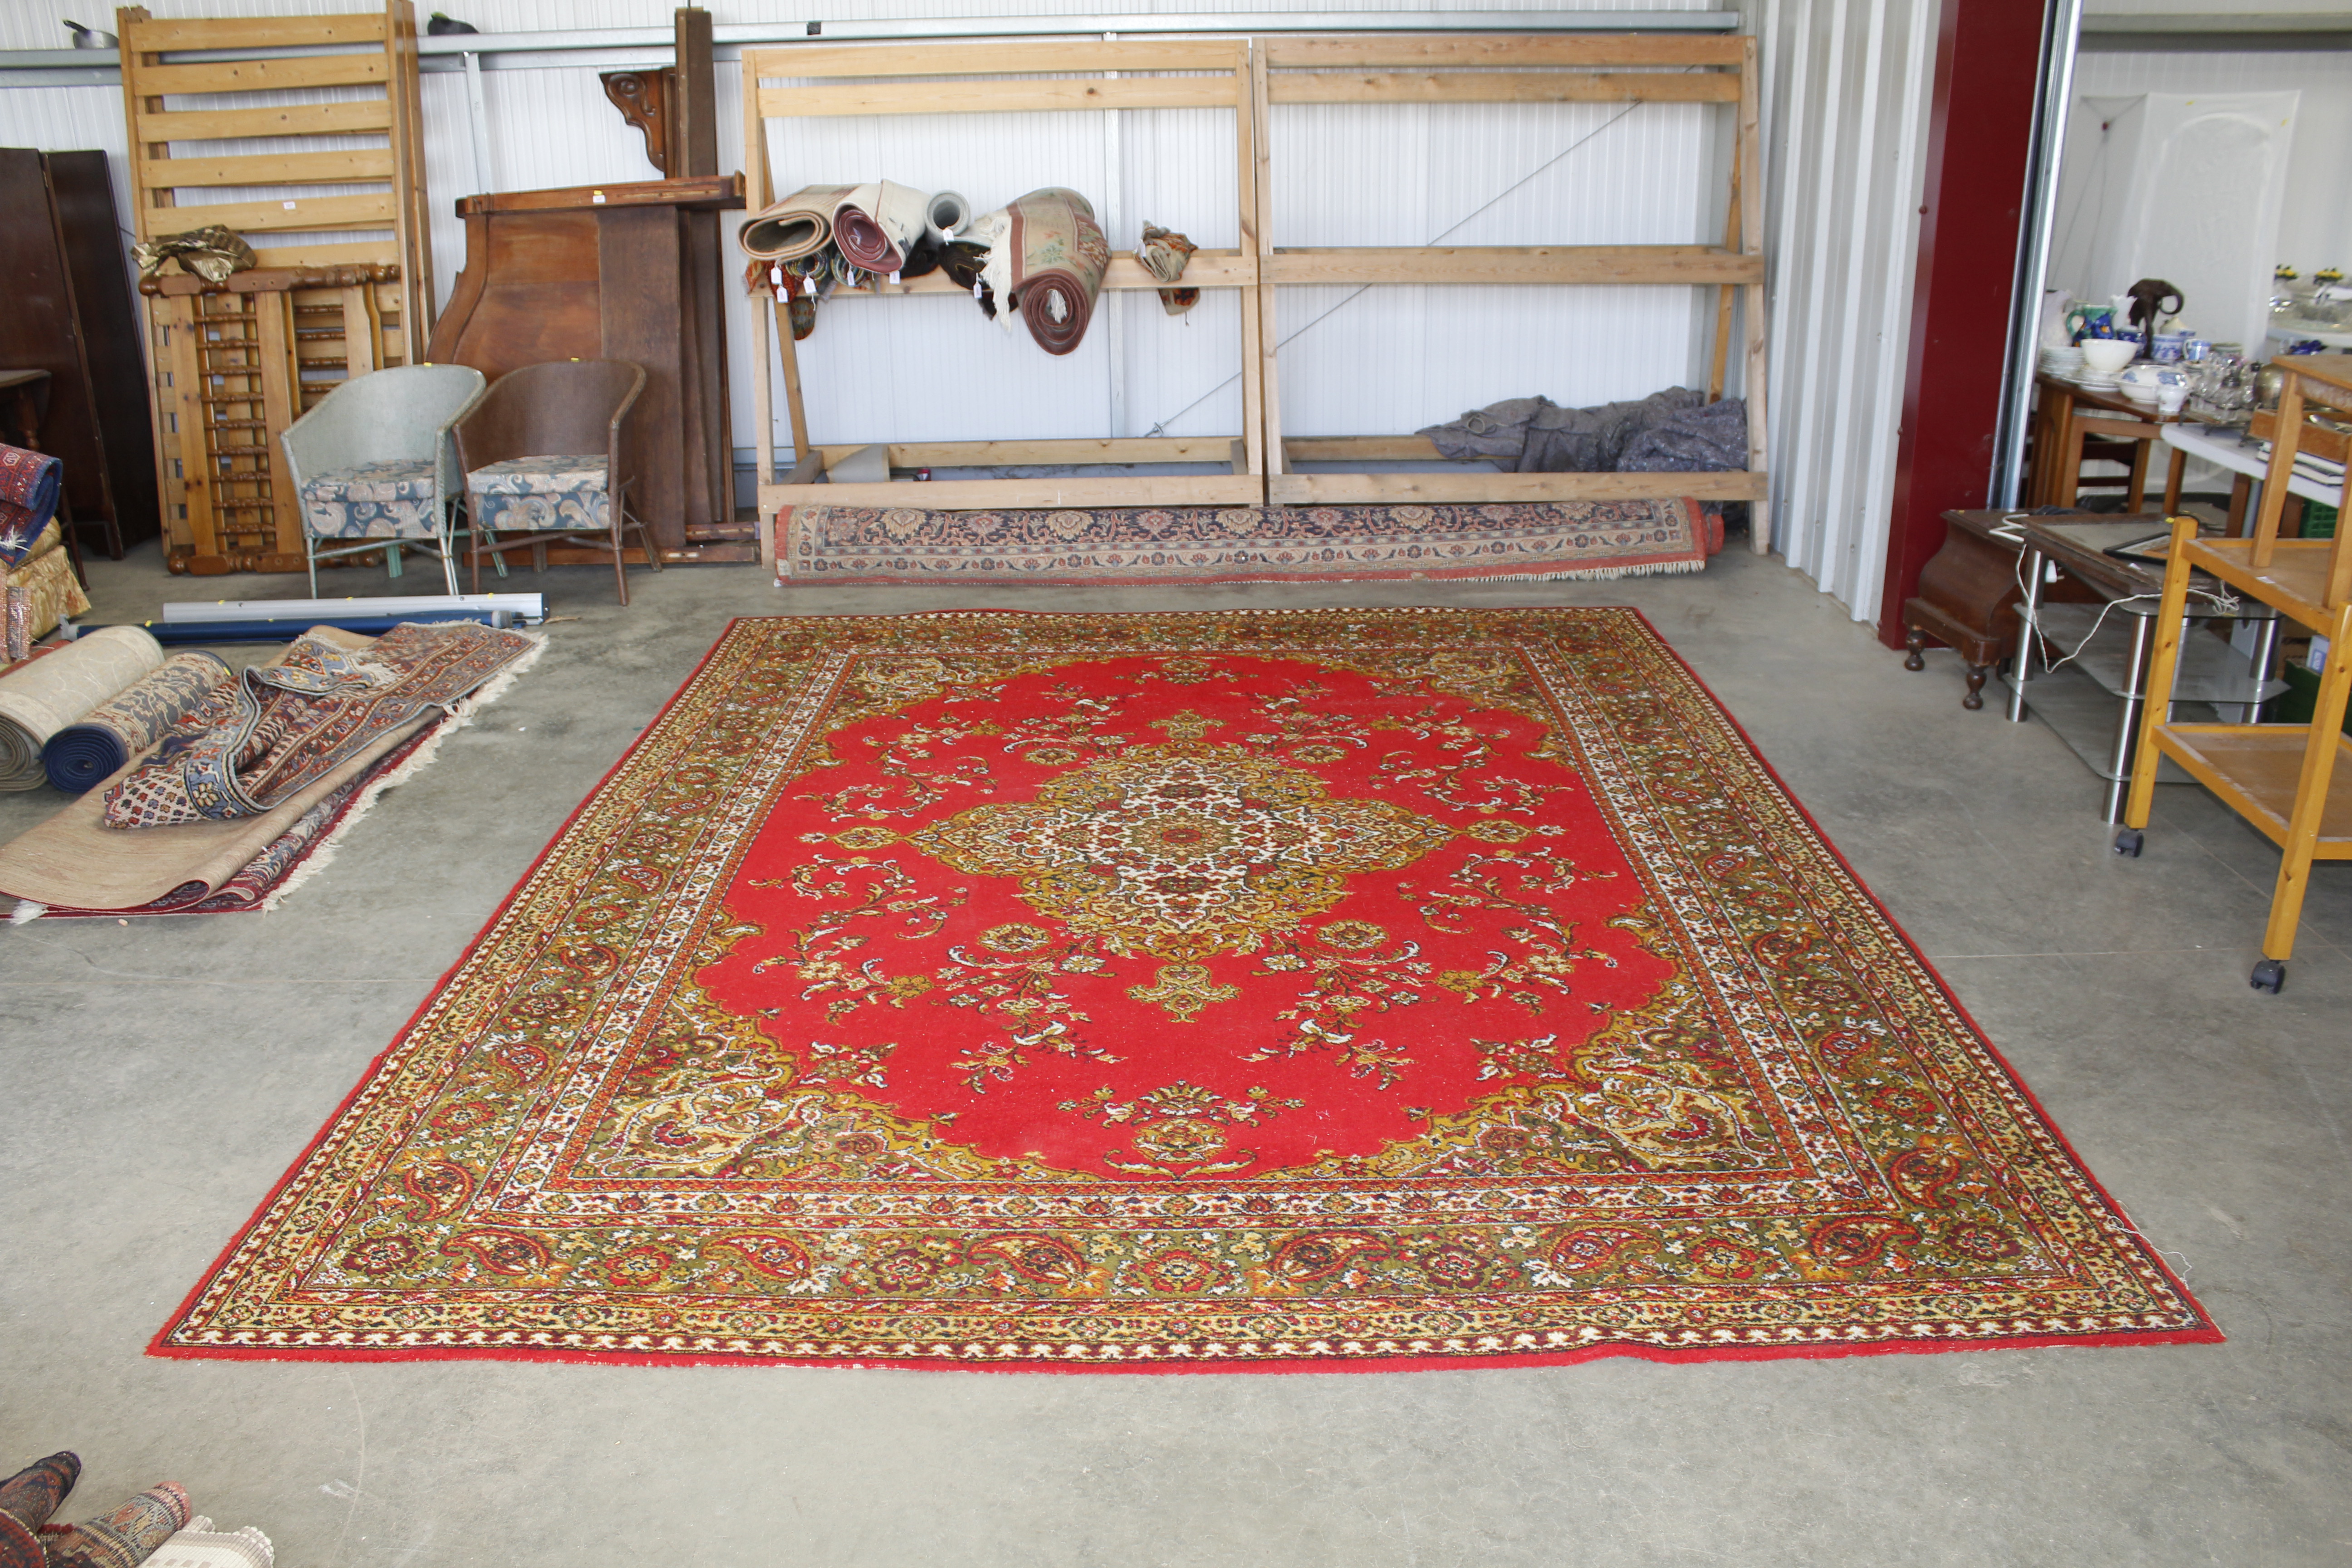 An approx. 12' x 9' red patterned rug AF